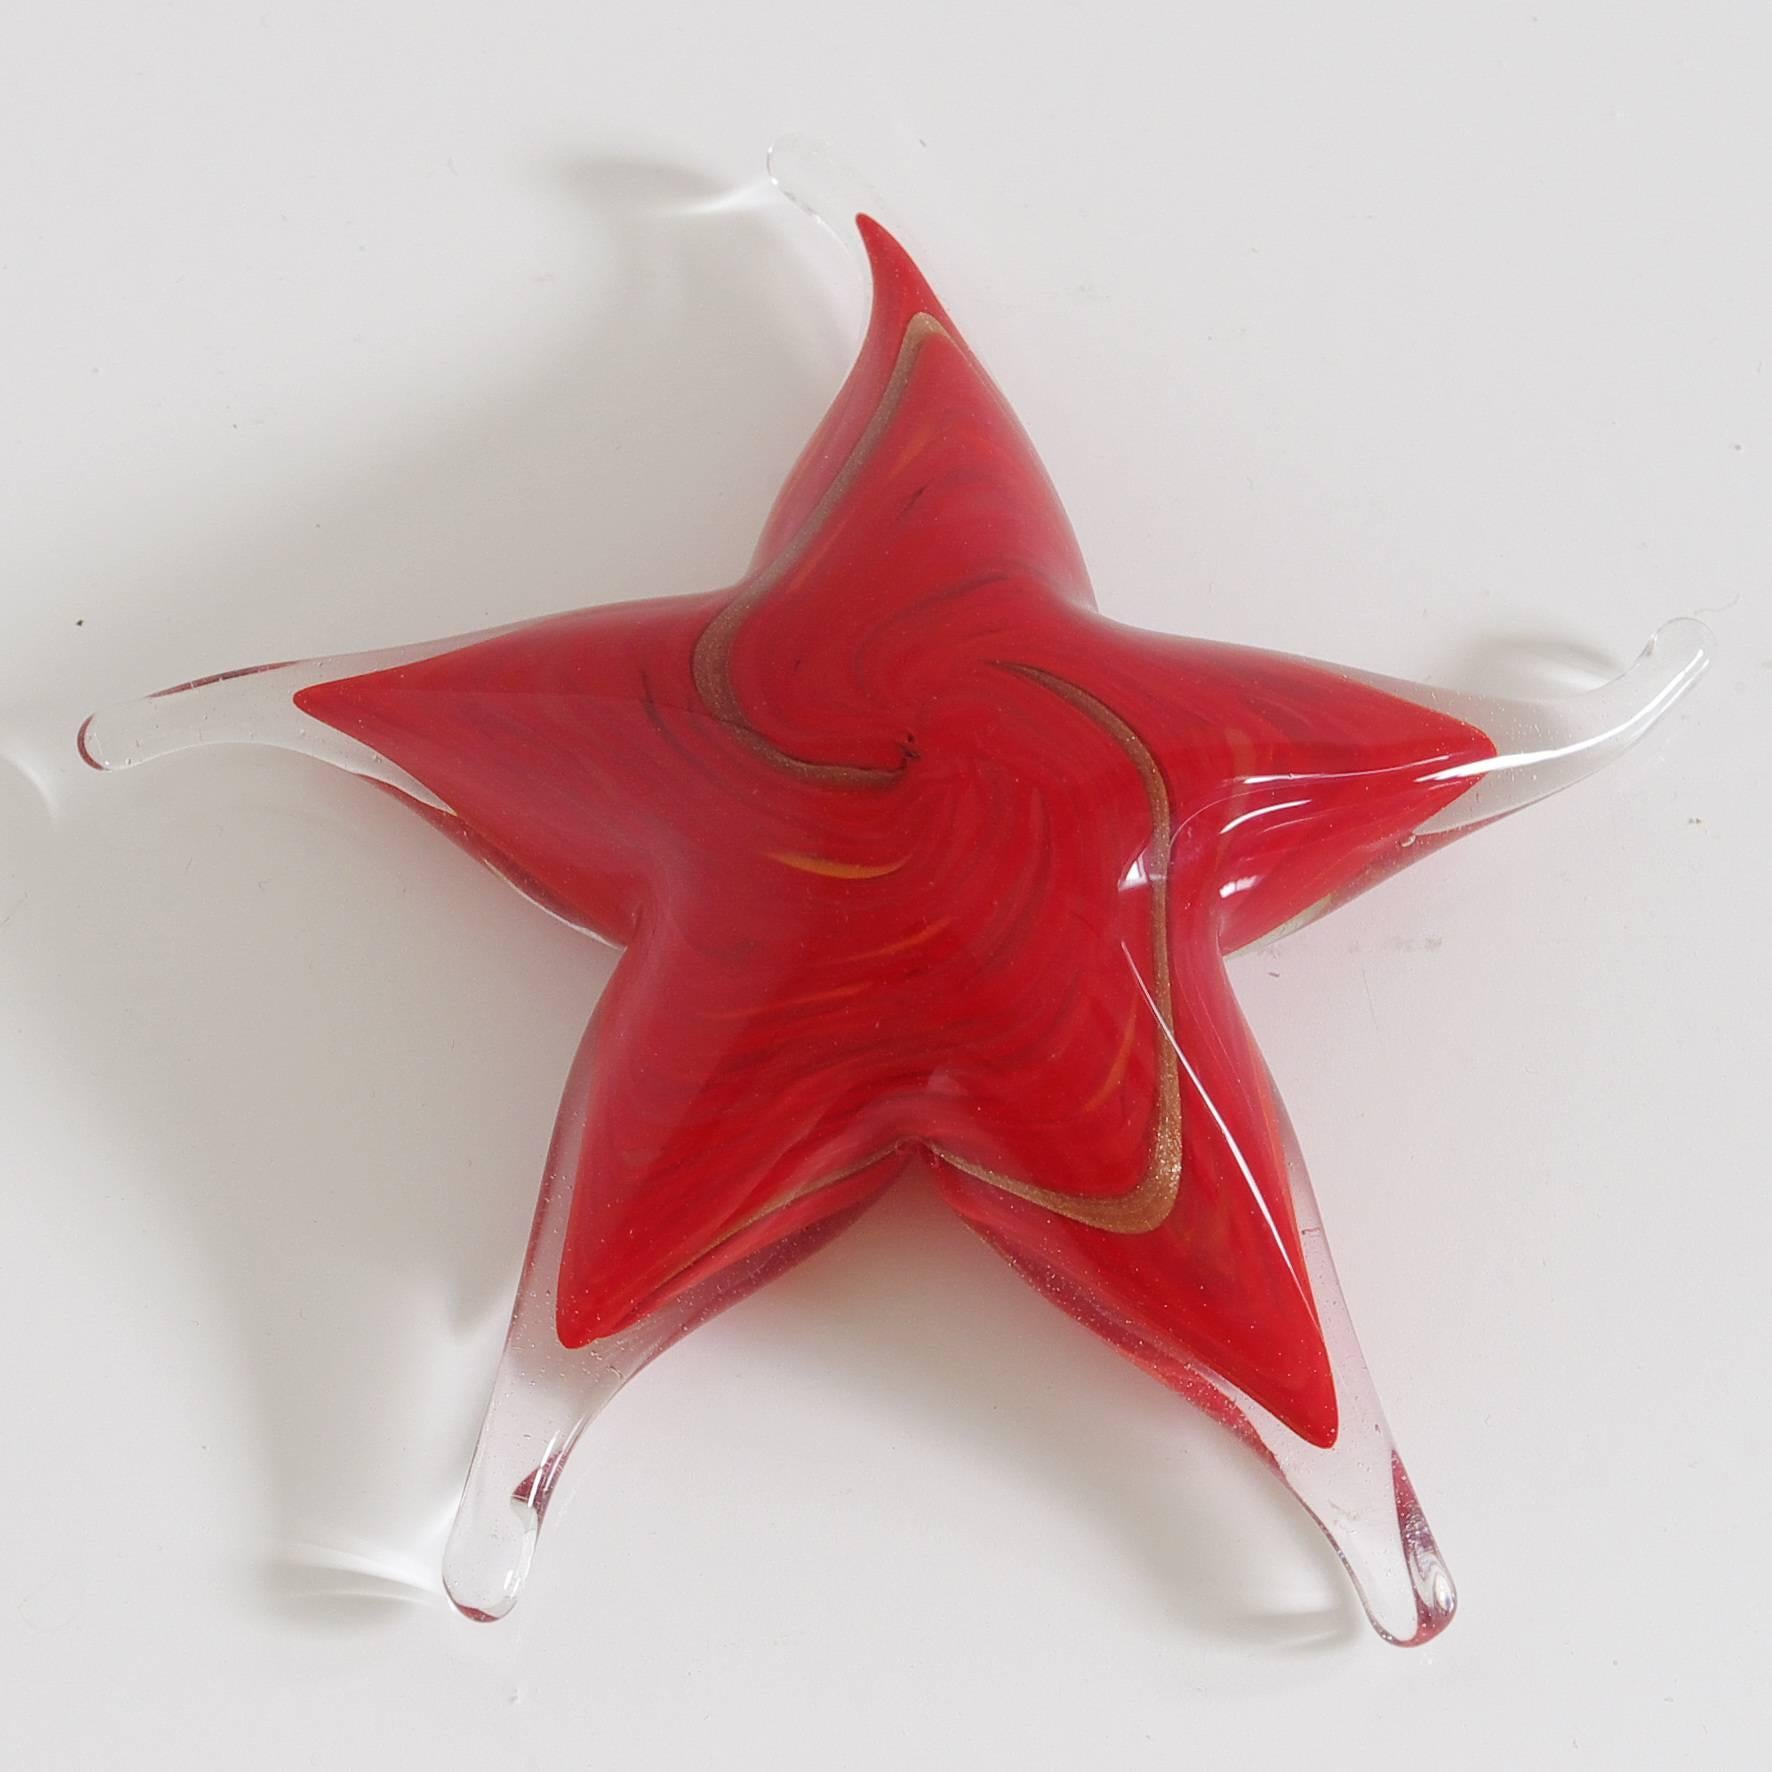 Vintage Italian red and gold infused Murano glass star paperweight / Made in Italy in the 1980s
Diameter: 5 inches / Height: 1.5 inches
One in stock in Palm Springs currently ON FINAL CLEARANCE SALE for $299!!!
This piece makes for a great and